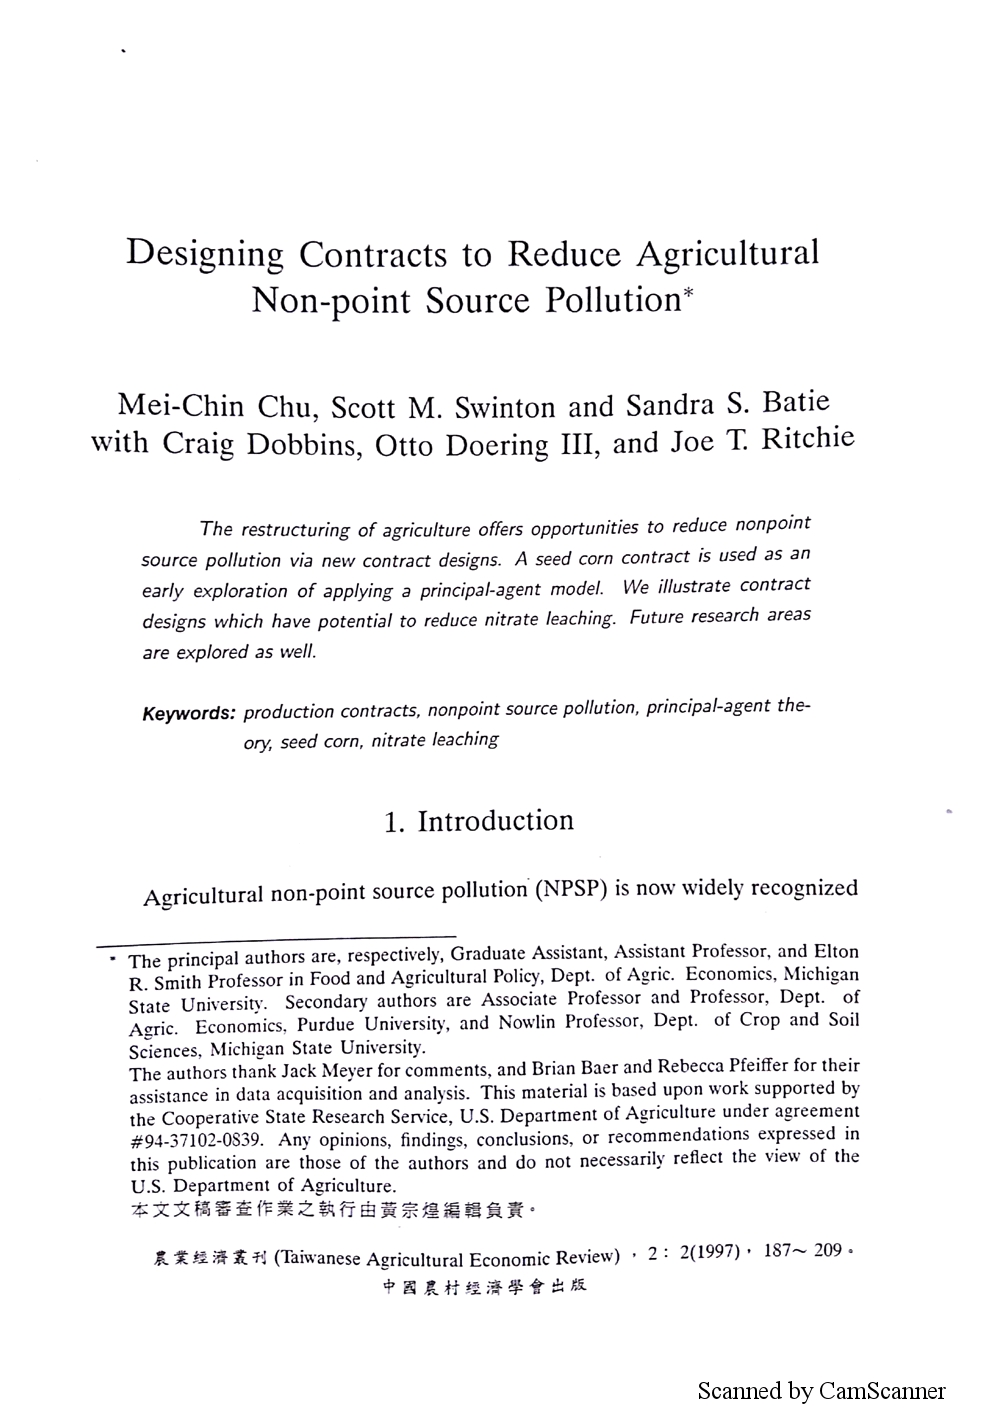 Designing_Contracts_to_Reduce_Agricultural_Non-point_Source_Pollution.jpg